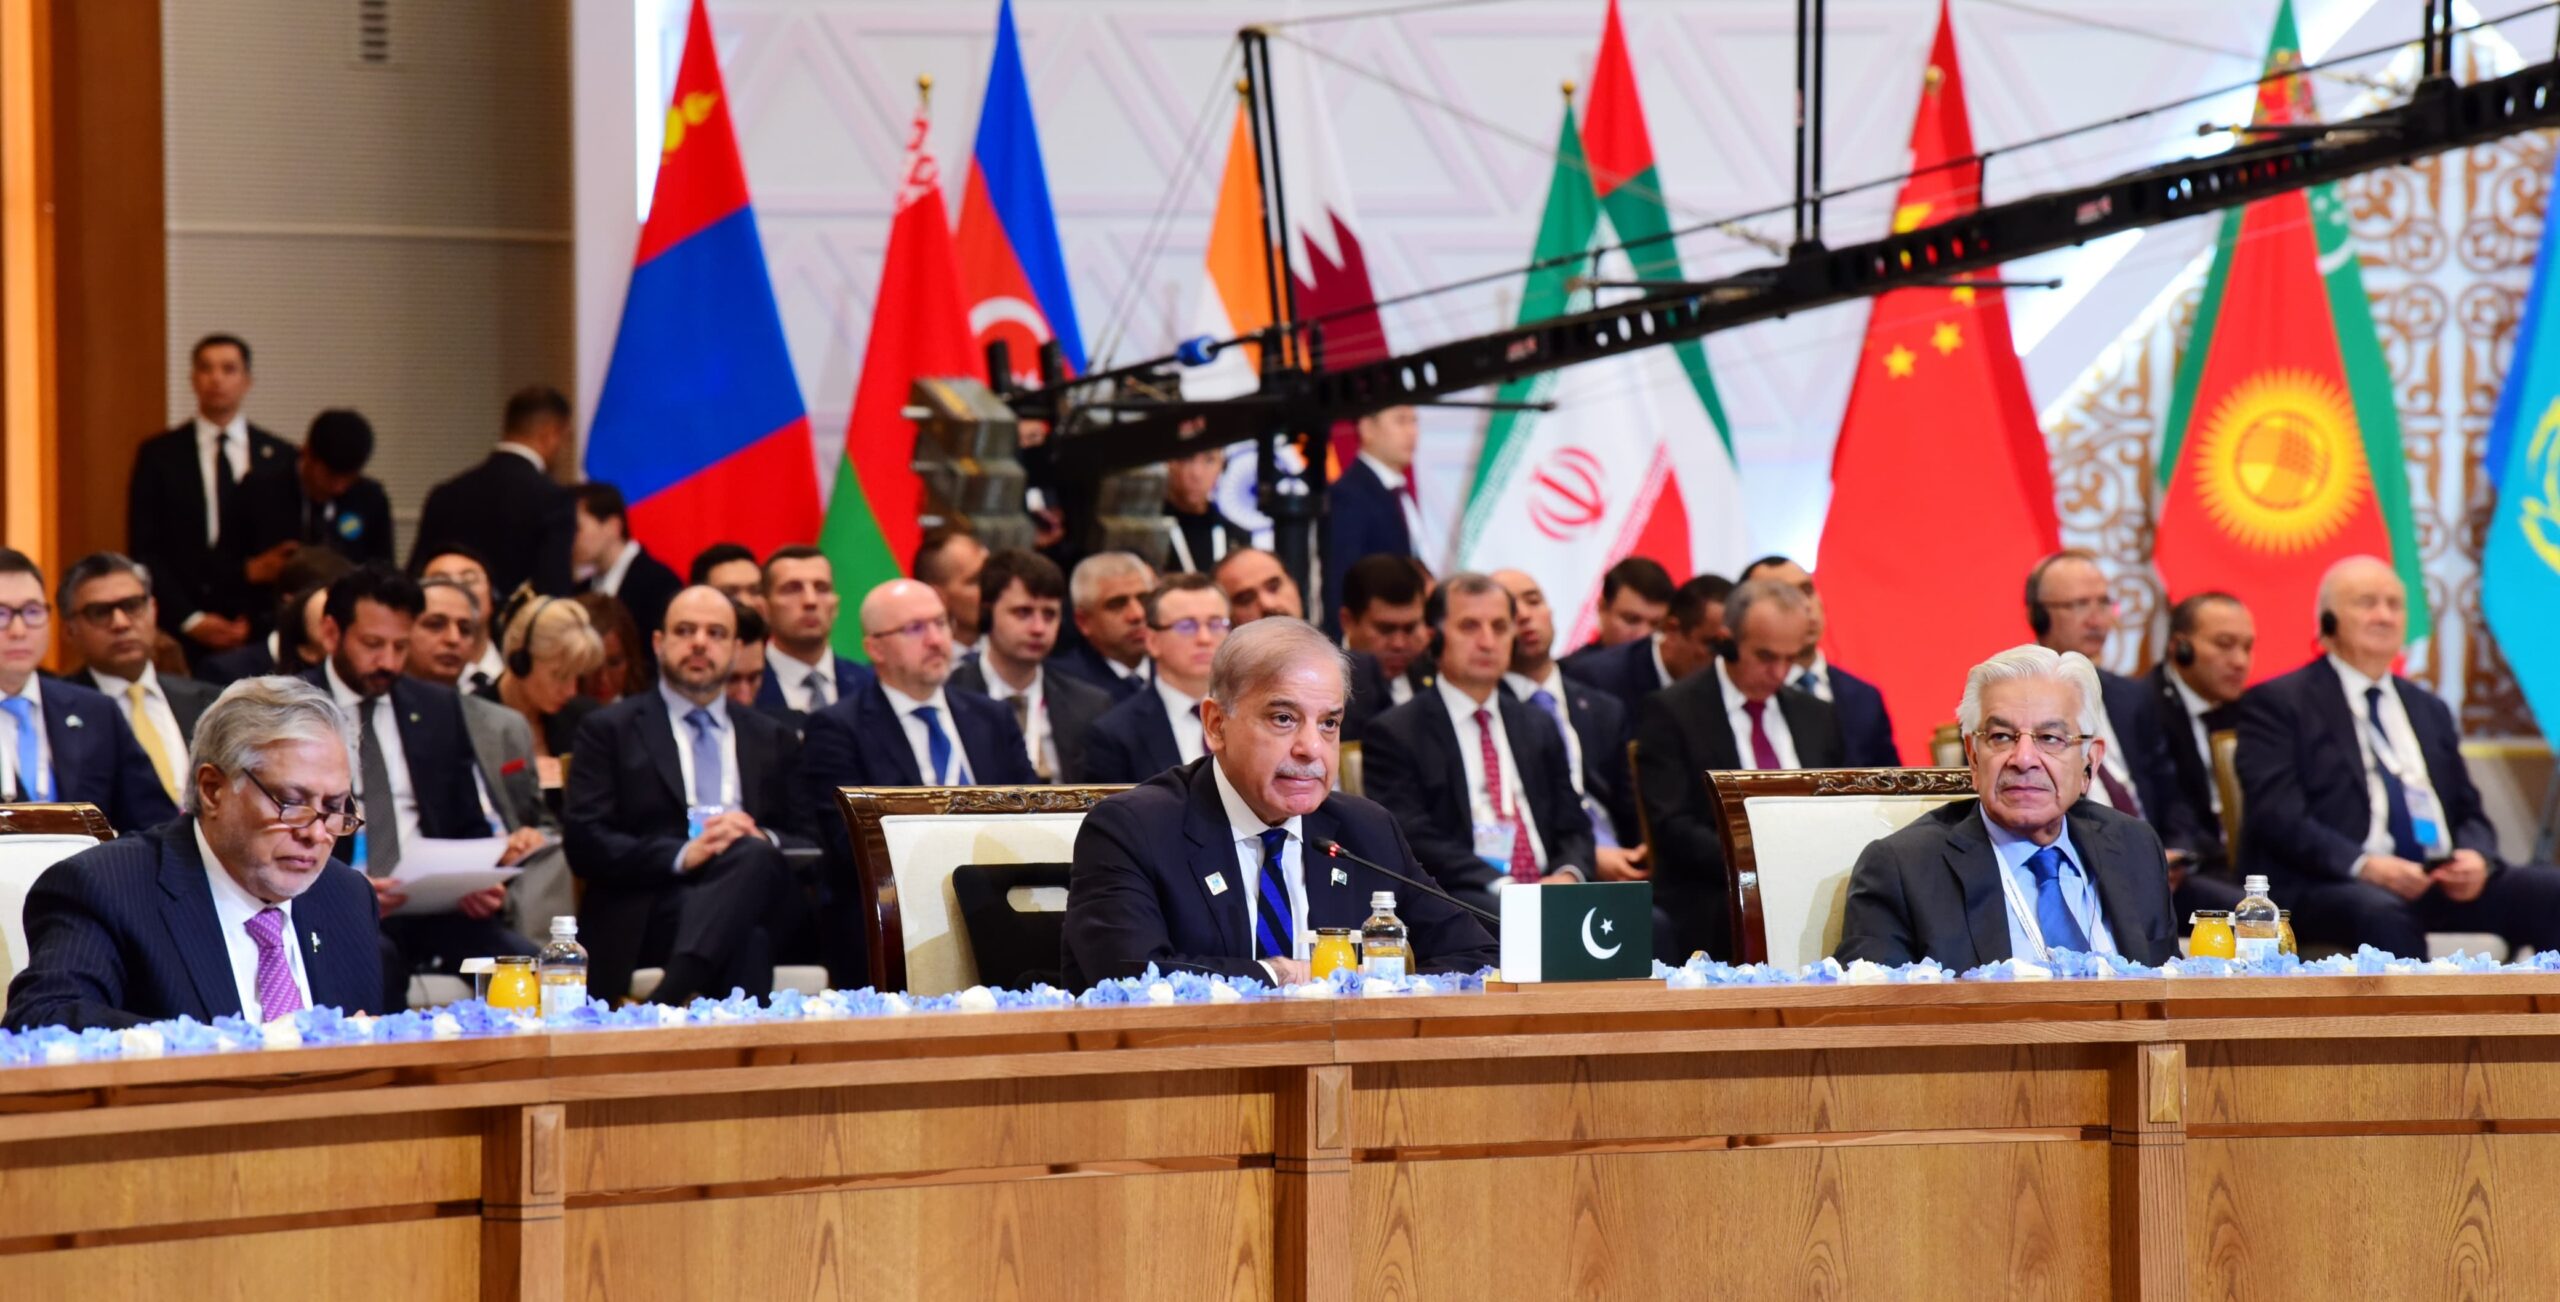 Prime Minister delivers Pakistan’s statement at SCO Summit.